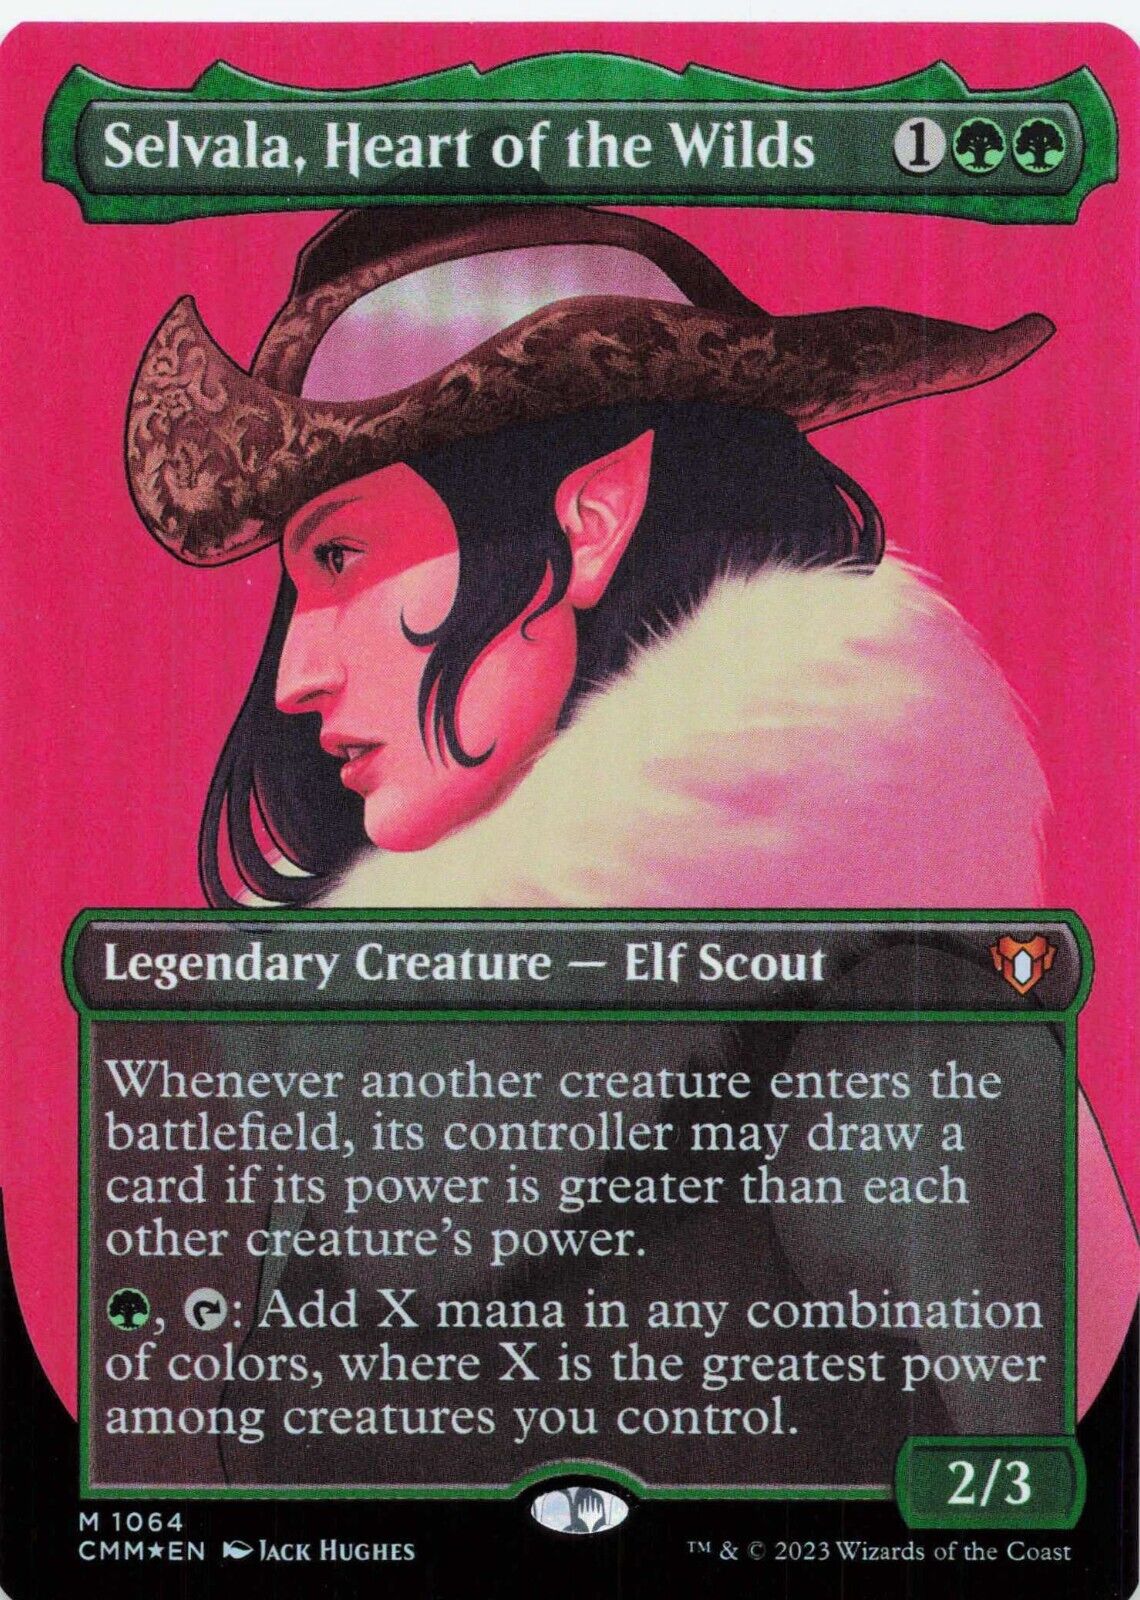 Magic The Gathering - Selvala, Heart of the Wilds (Textured Foil) CMM #1064